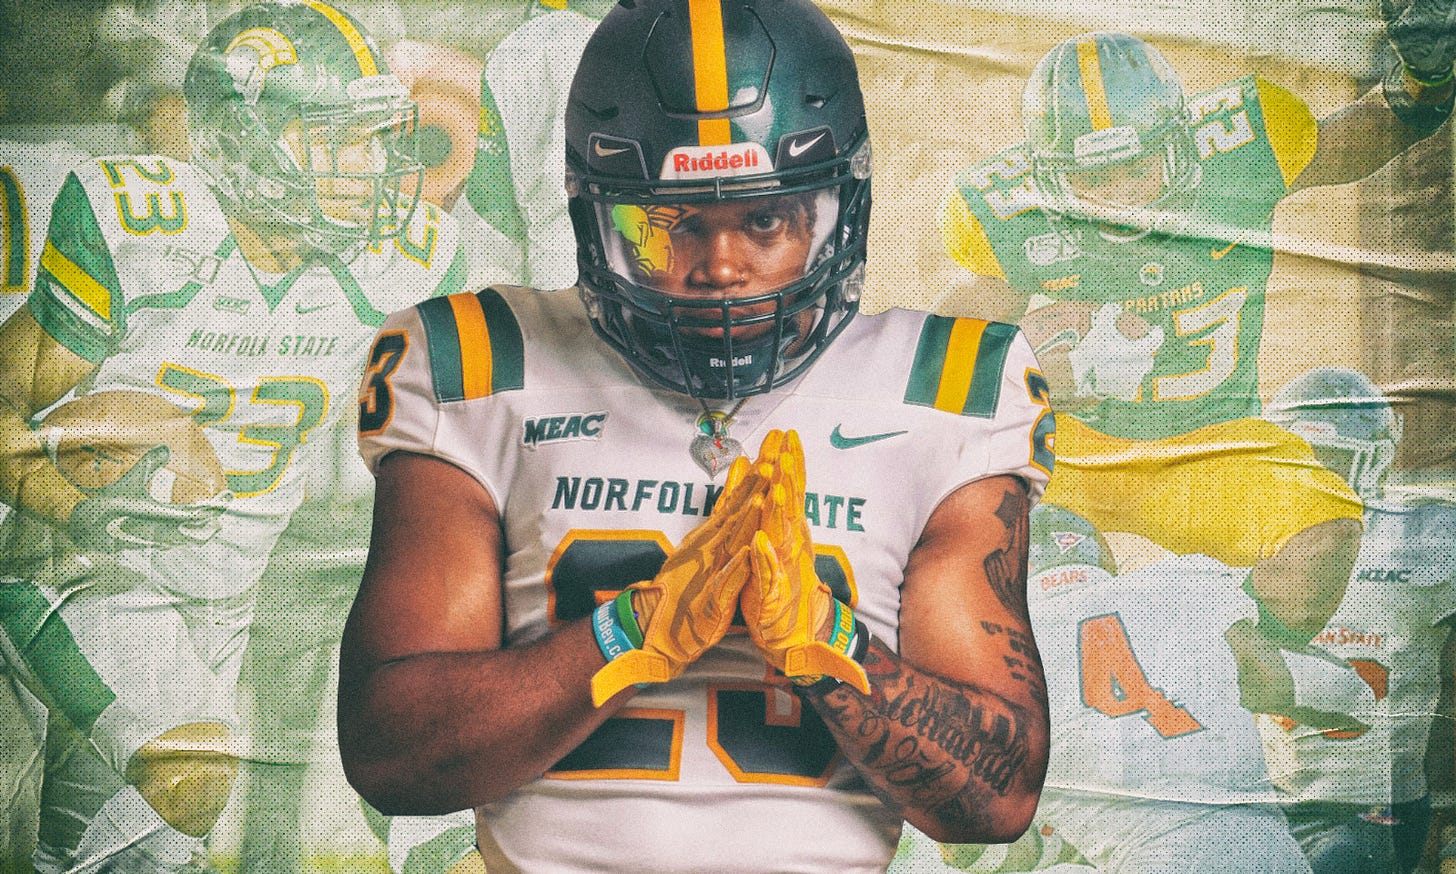 Rayquan Smith pushing for more HBCU NIL - HBCU Gameday